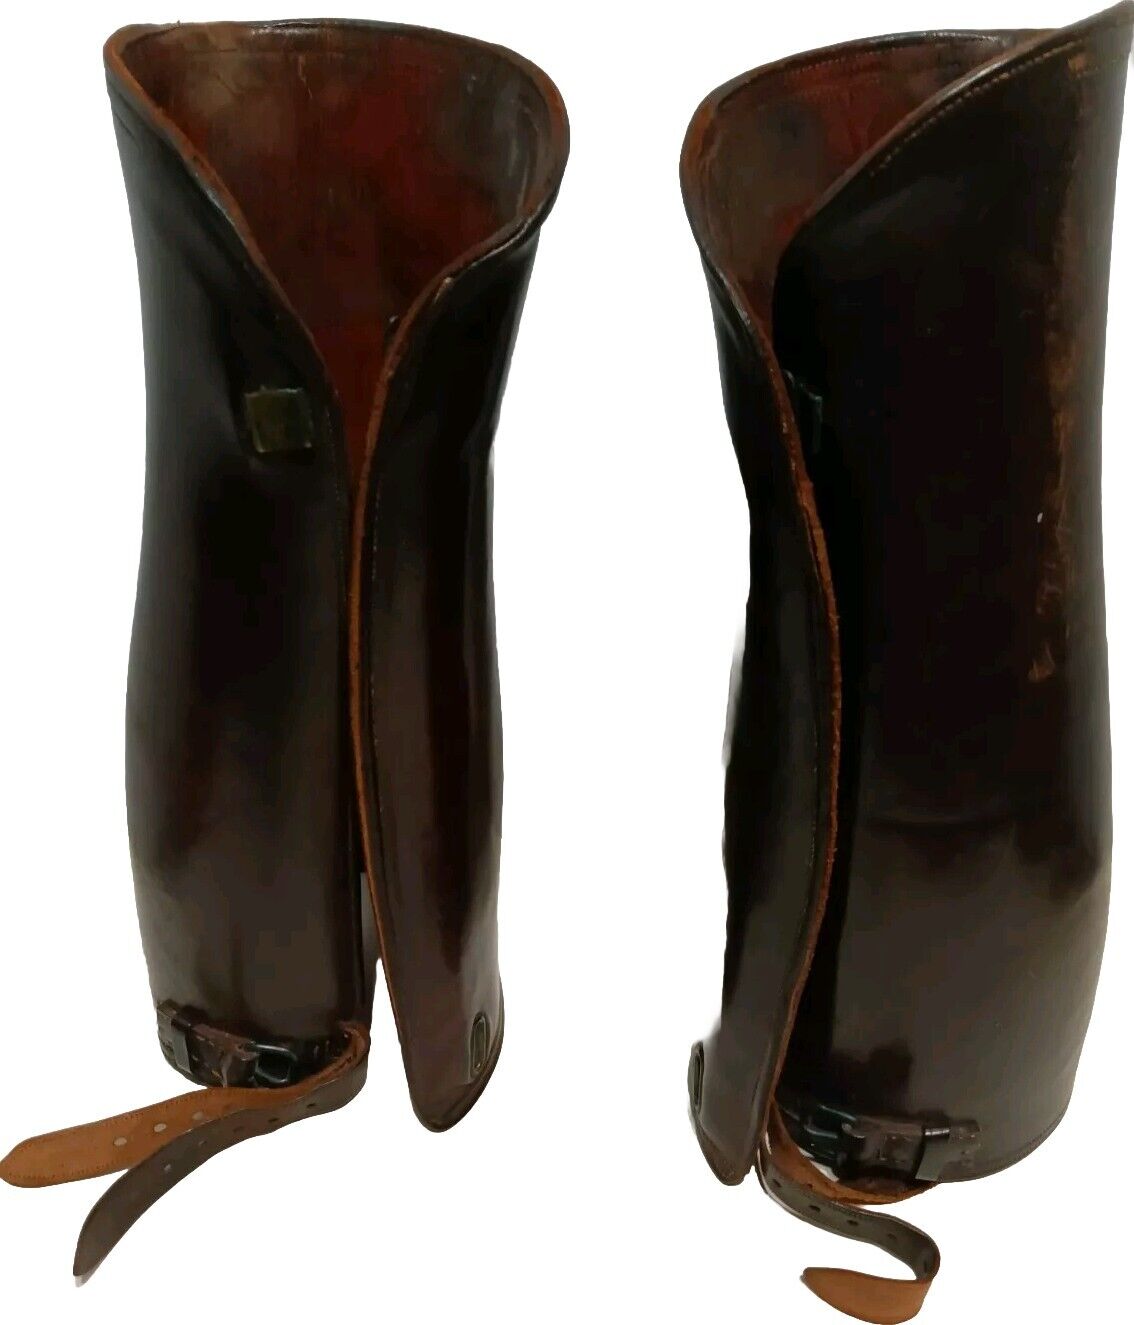 Antique Vintage Brown Leather Riding Spats Gaiters Shin Guards Leggings Calvary